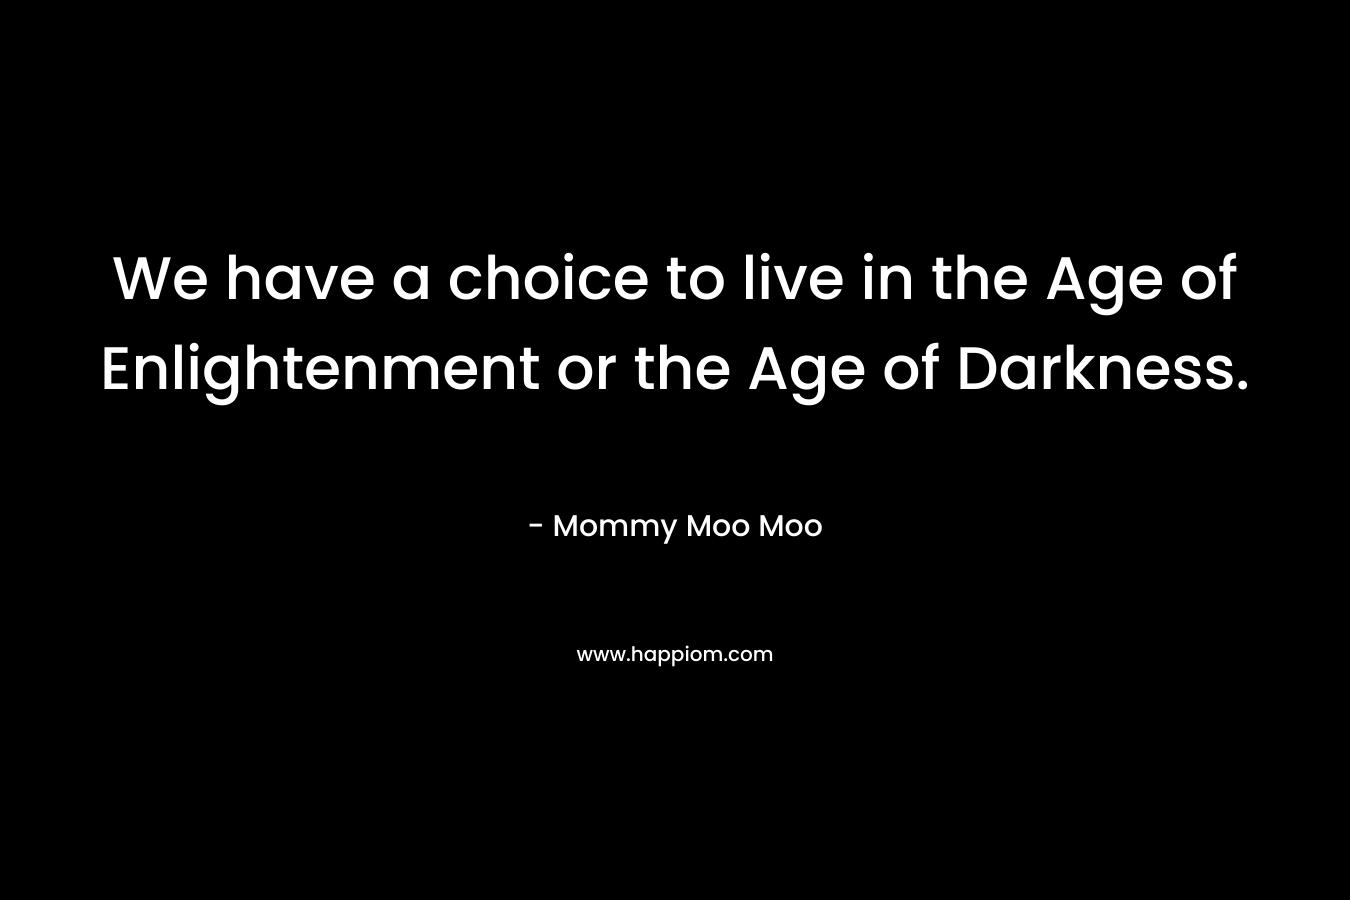 We have a choice to live in the Age of Enlightenment or the Age of Darkness. – Mommy Moo Moo